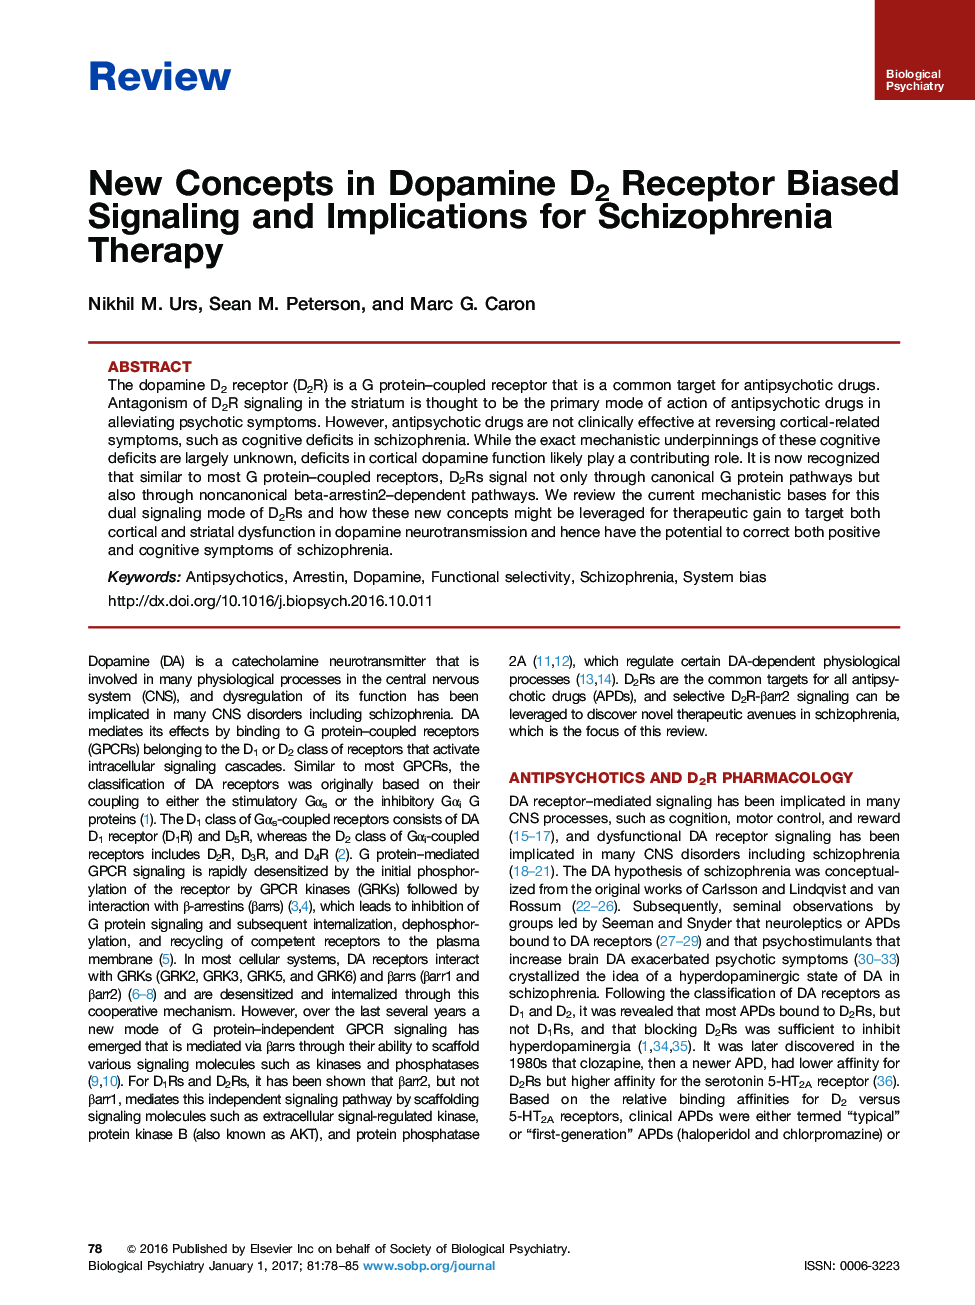 ReviewNew Concepts in Dopamine D2 Receptor Biased Signaling and Implications for Schizophrenia Therapy